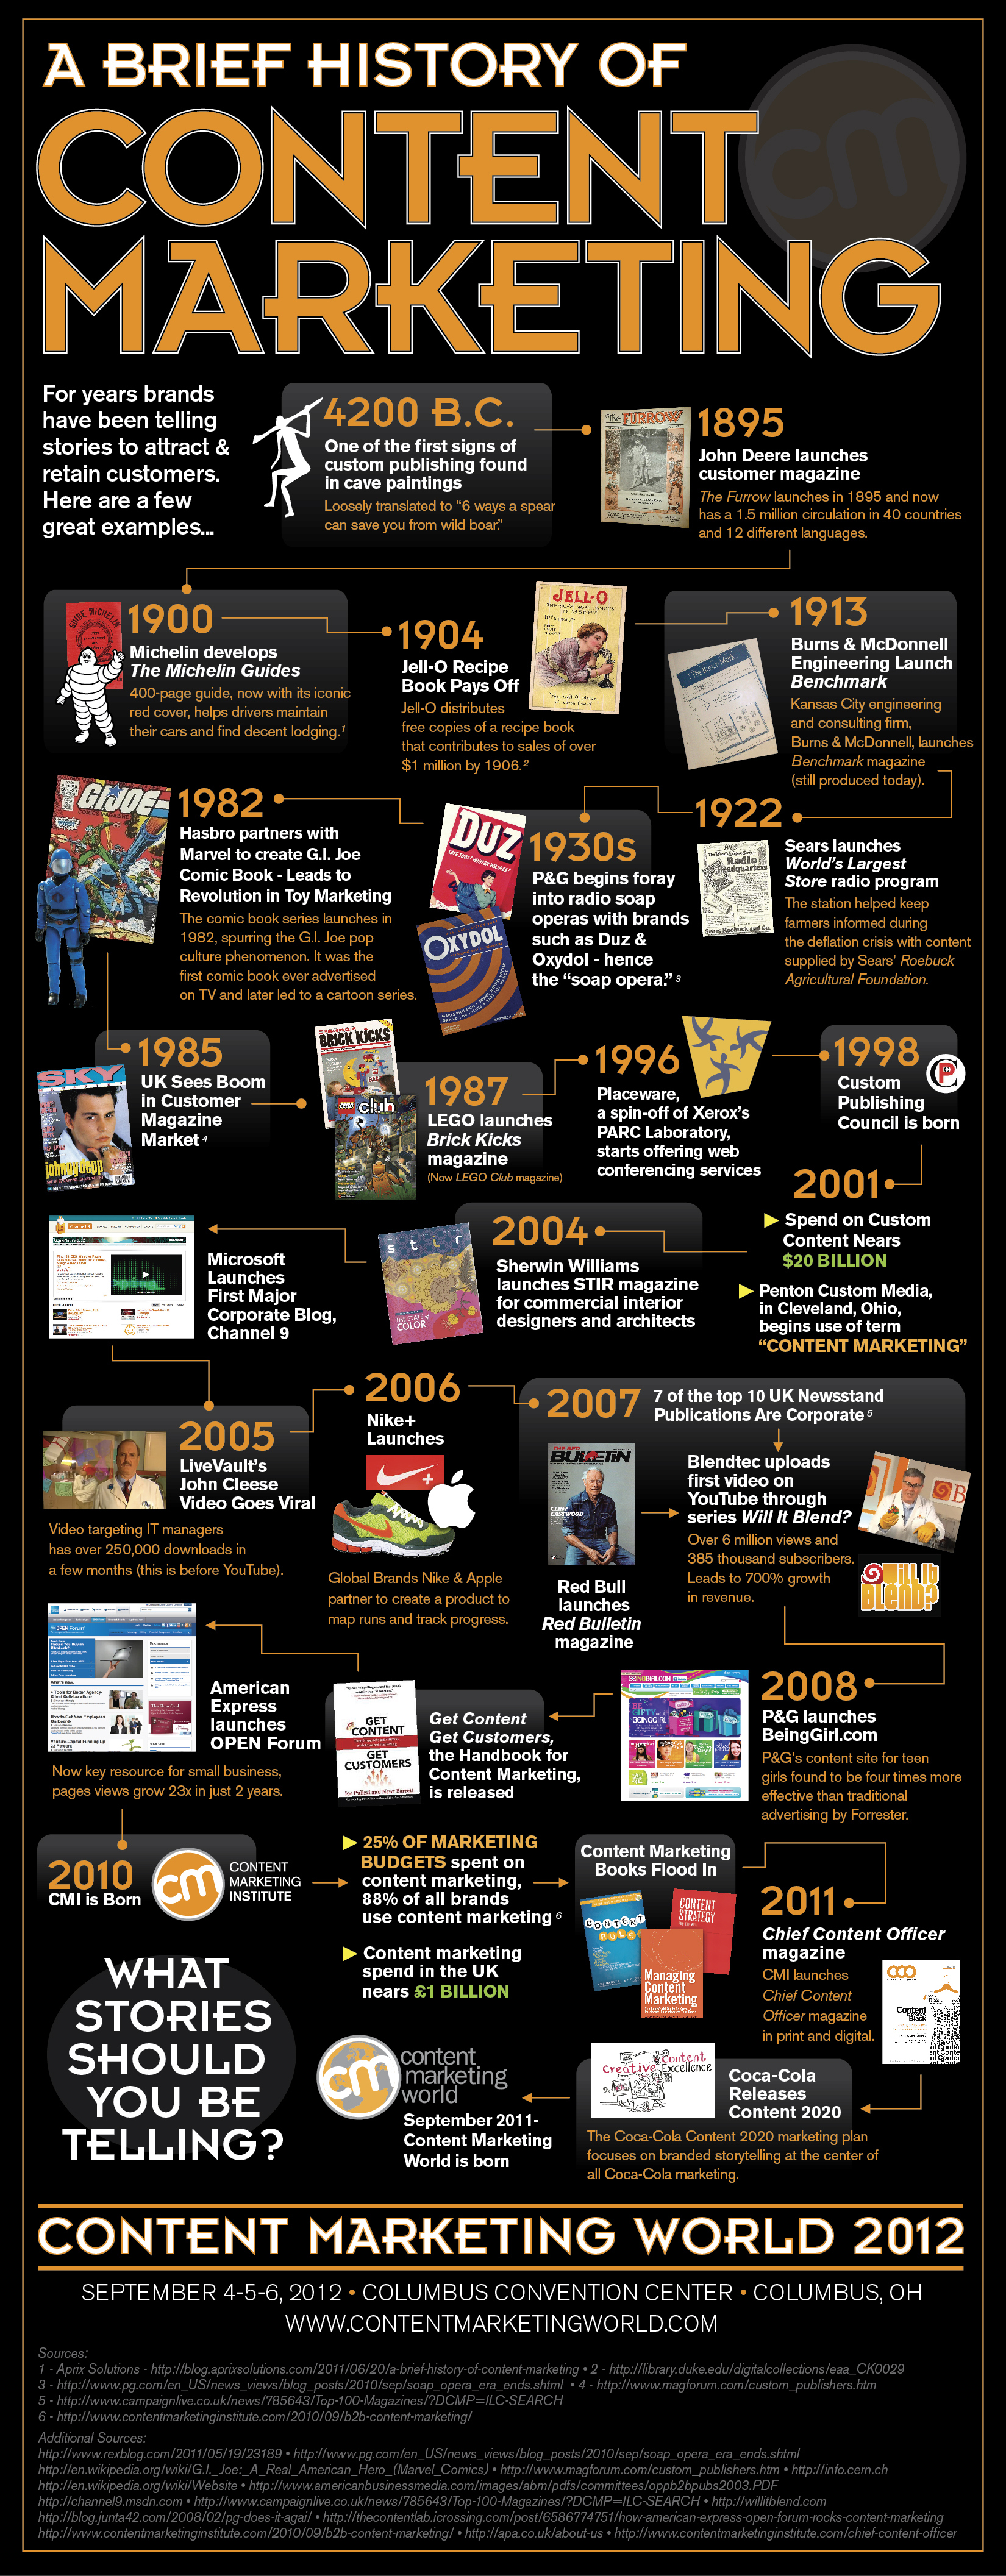 http://www.franchise-info.ca/monetizing/Brief%20History%20of%20Content%20Marketing%20Infographic.jpg